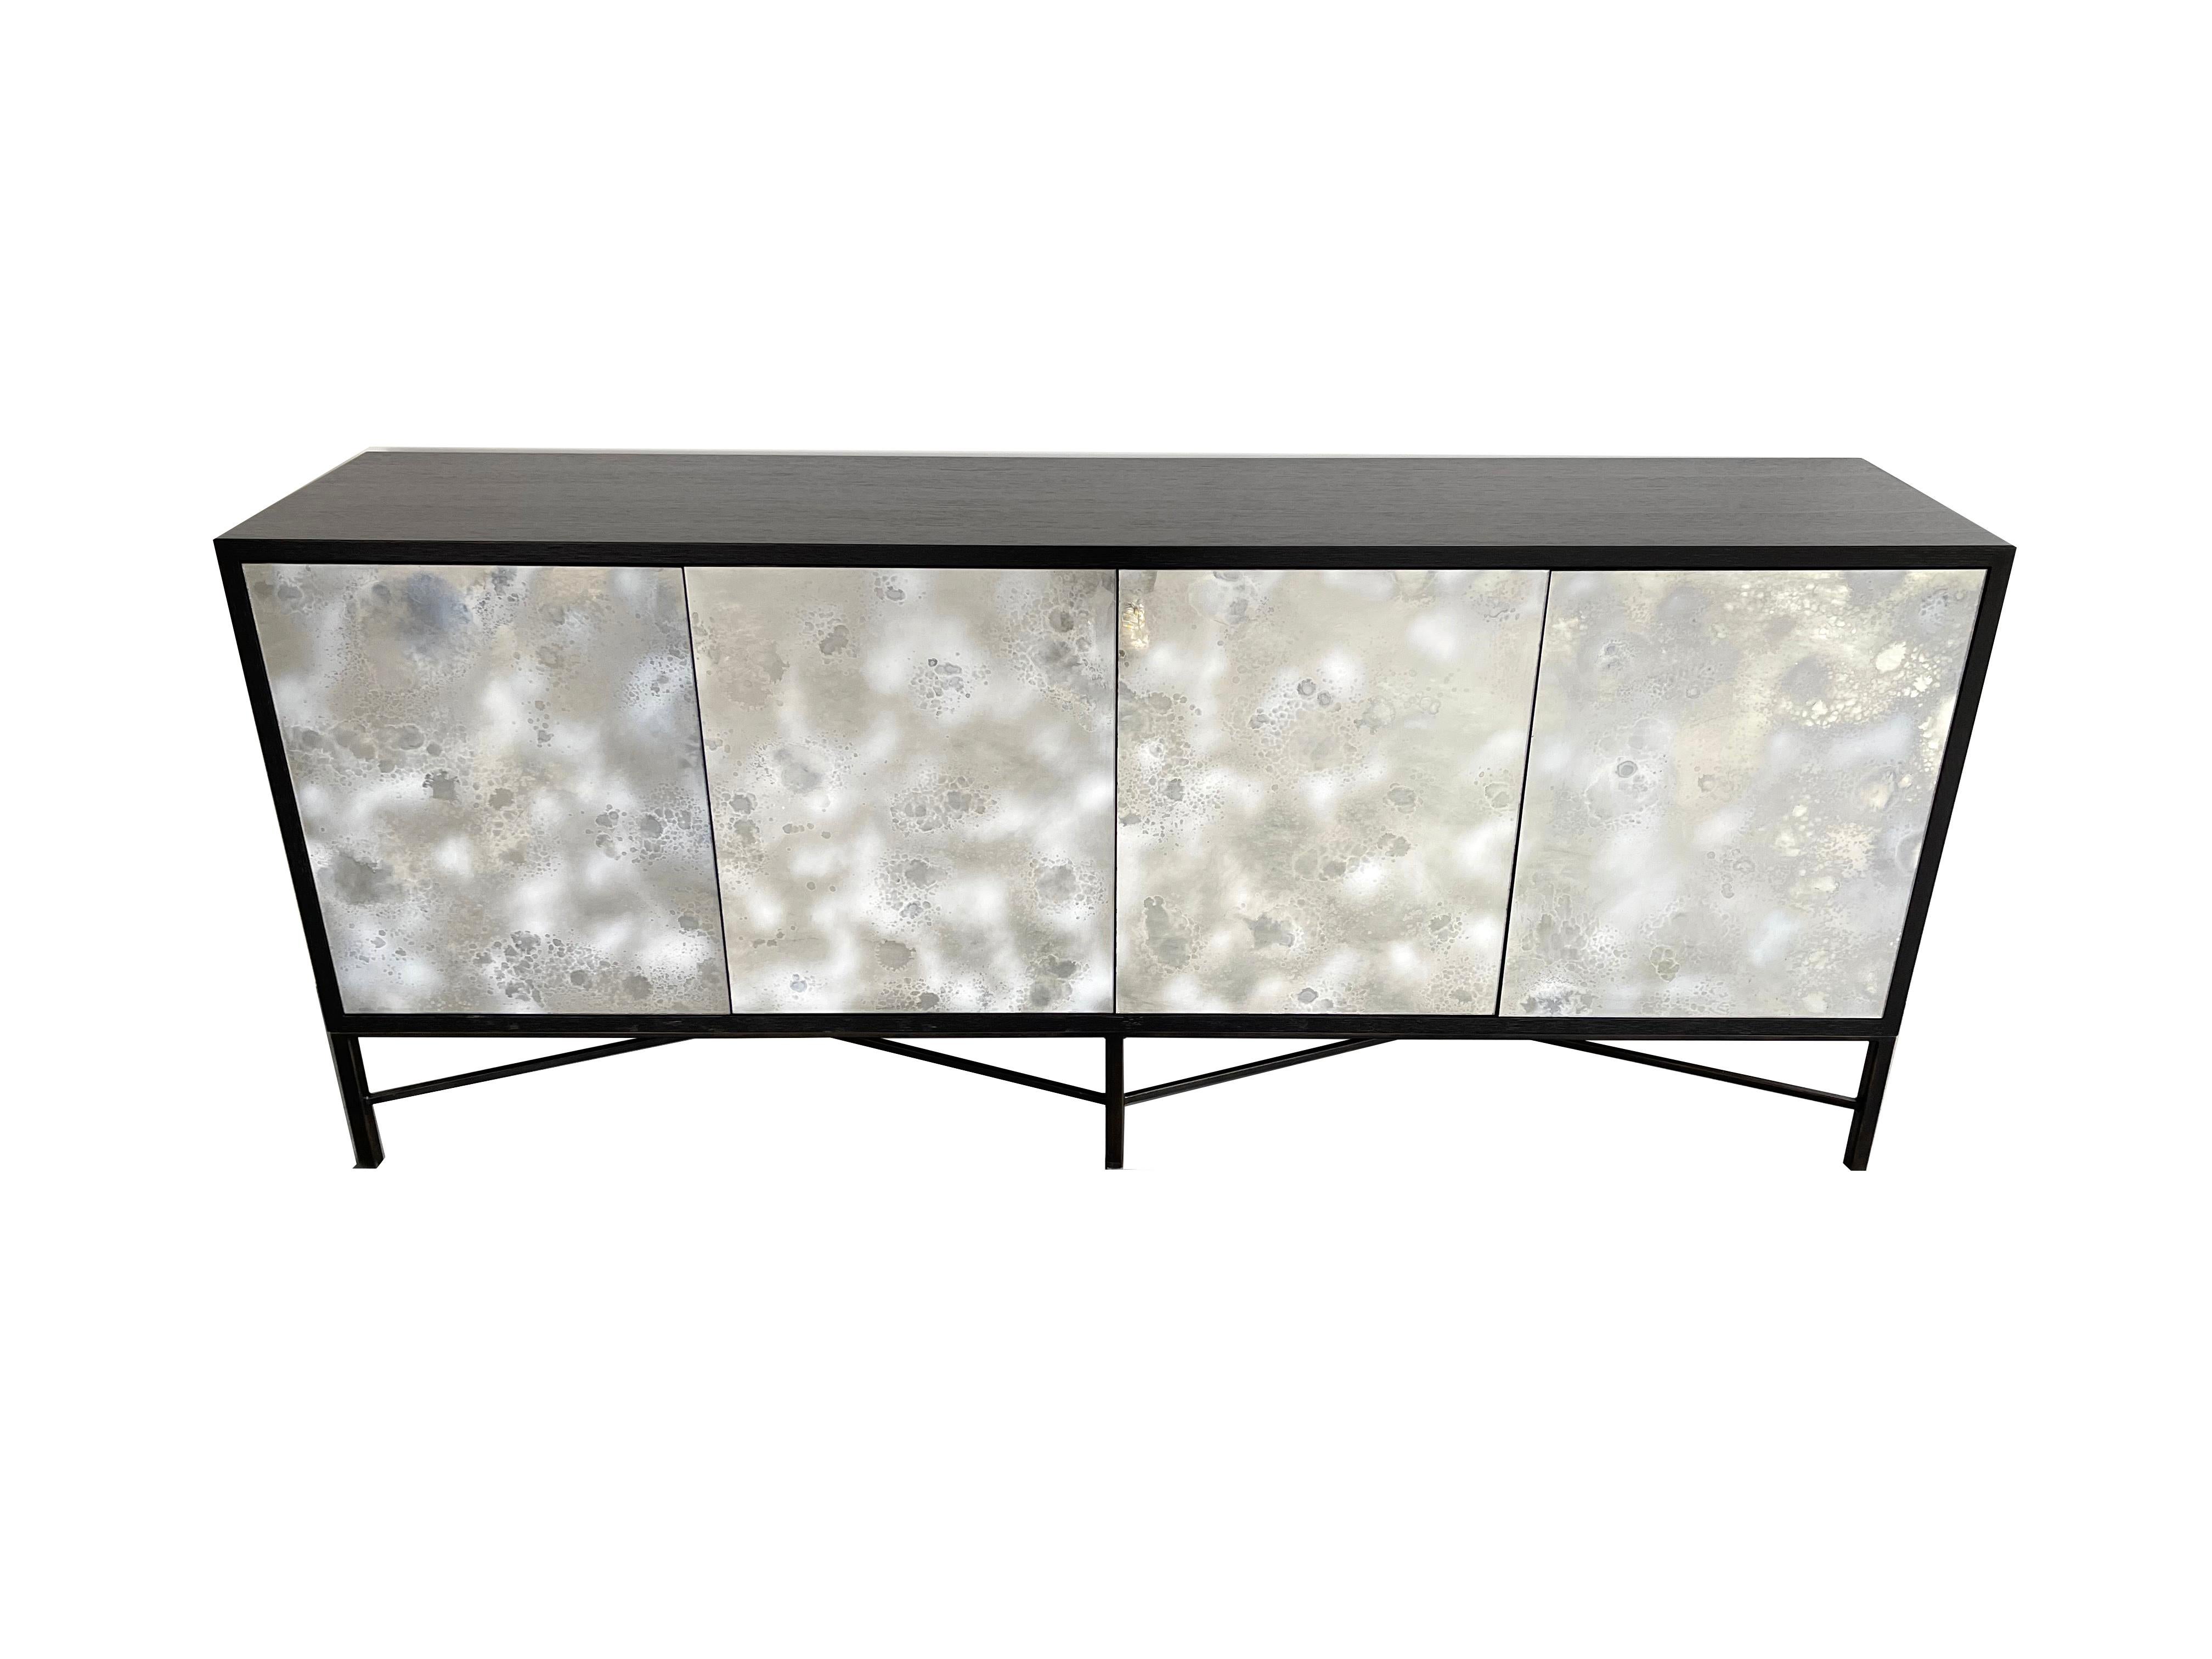 The Industrial buffet or credenza by Ercole home has a 4-door front with touch latch.
The wood is finished in a Wenge on oak.
Hand-painted white dust eglomise glass are on the door surfaces which is handpainted in out Brooklyn NY studio.
The